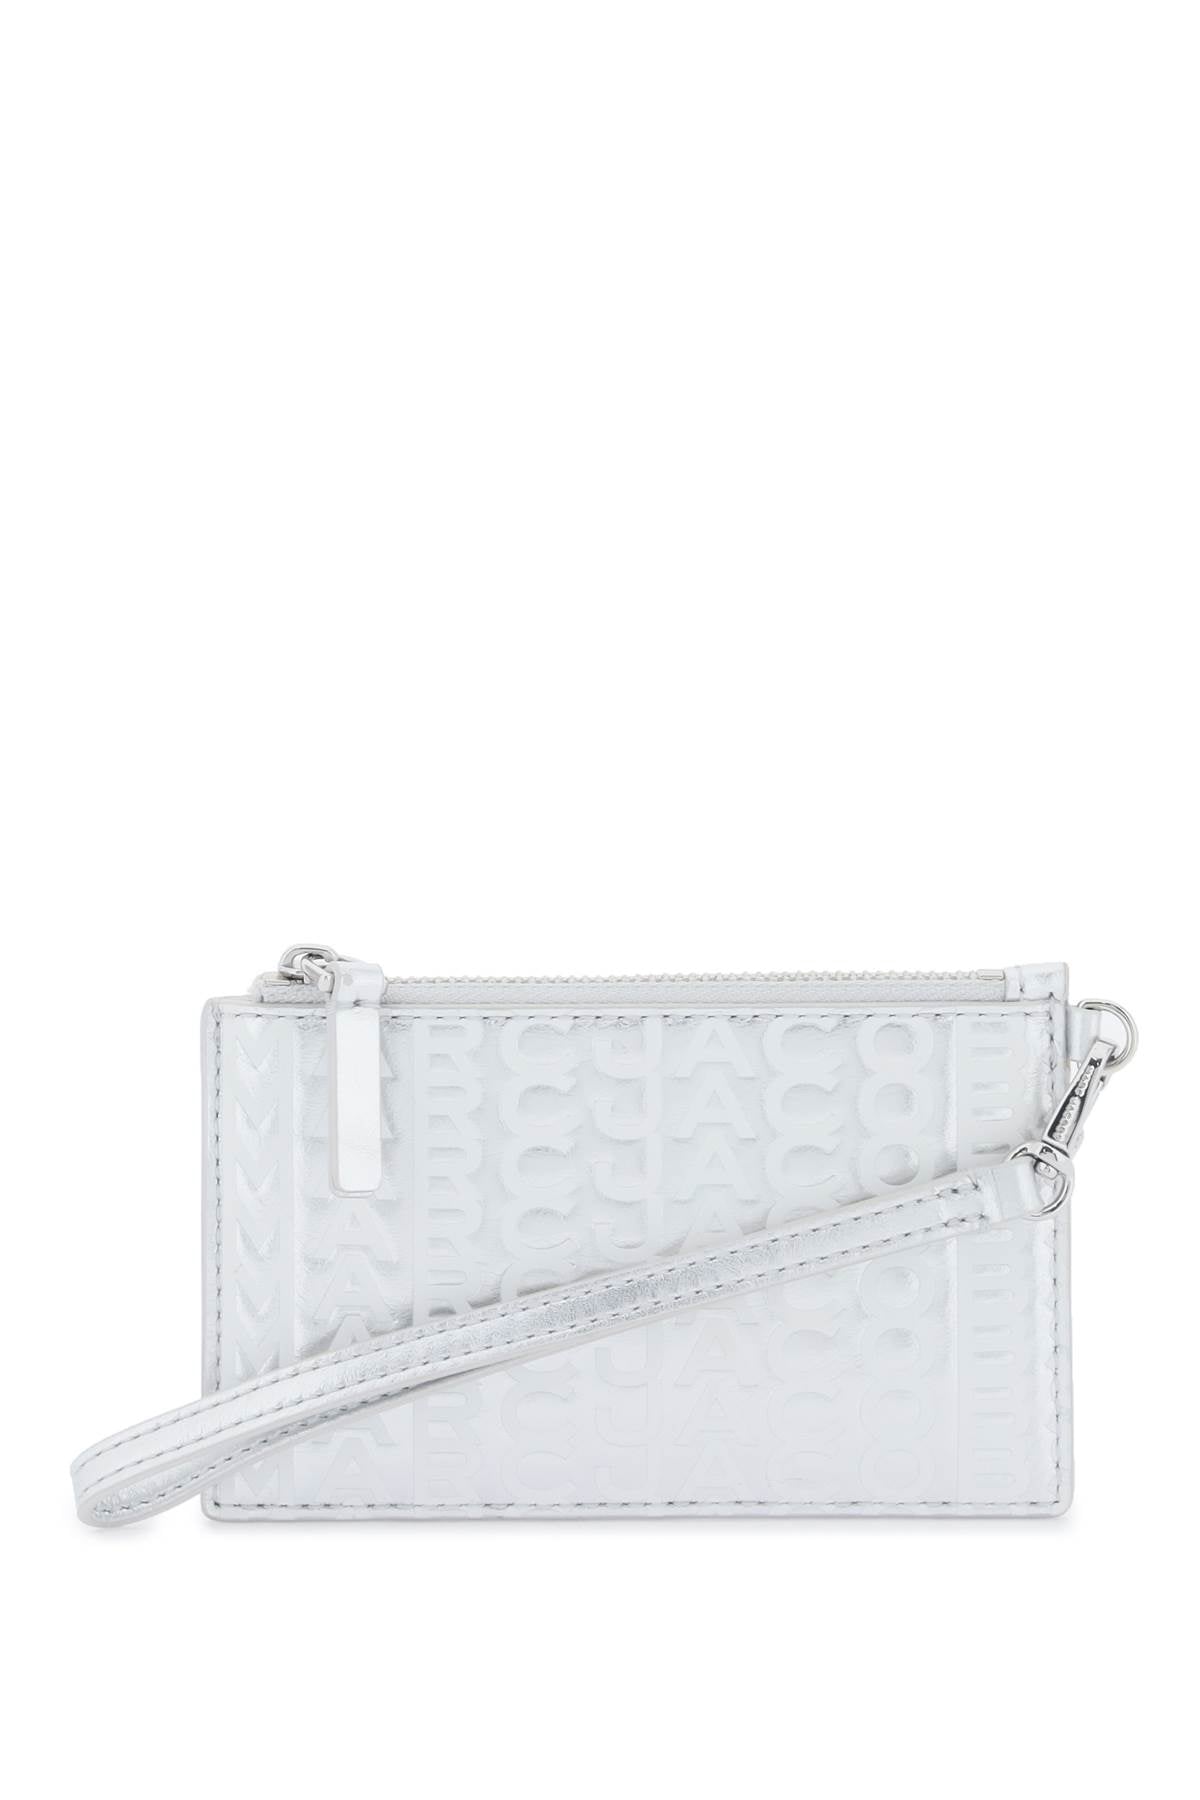 Marc jacobs the metallic top zip wristlet wallet-women > accessories > wallets & small leather goods > wallets-Marc Jacobs-os-Silver-Urbanheer